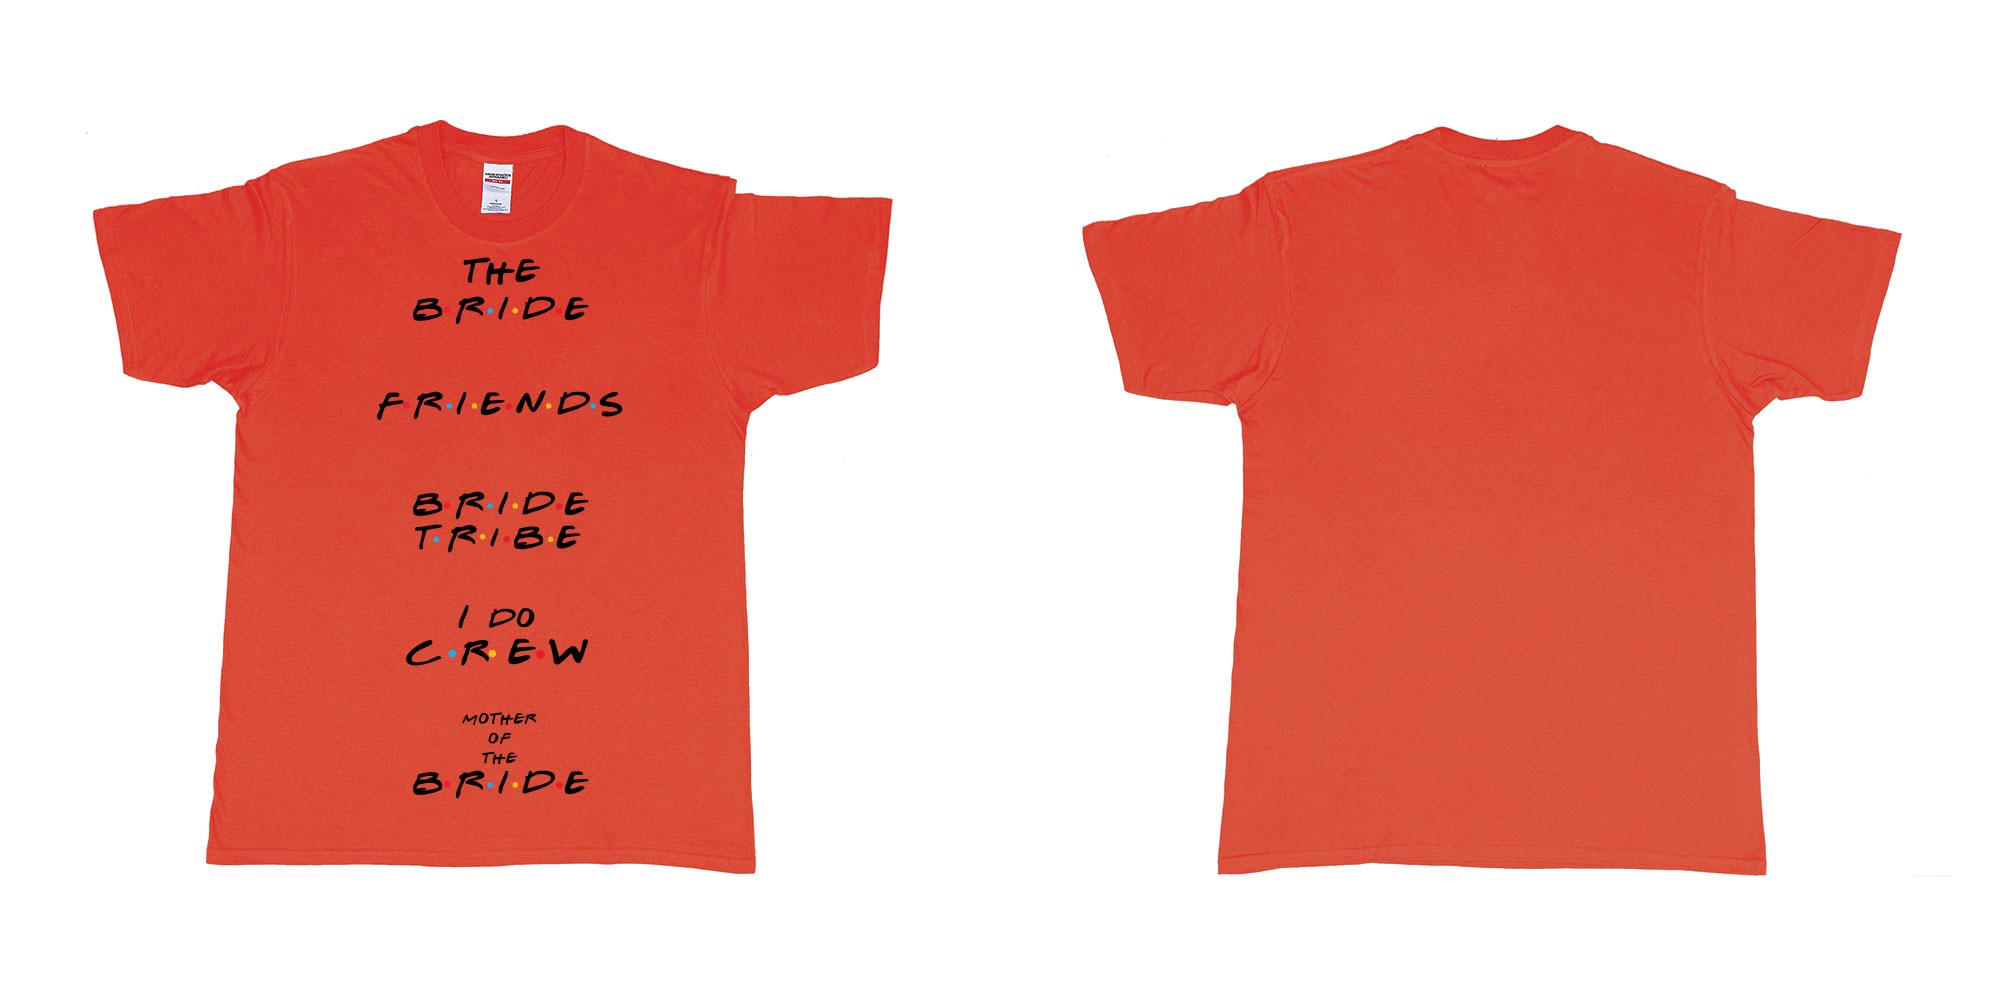 Custom tshirt design TPW friends in fabric color red choice your own text made in Bali by The Pirate Way